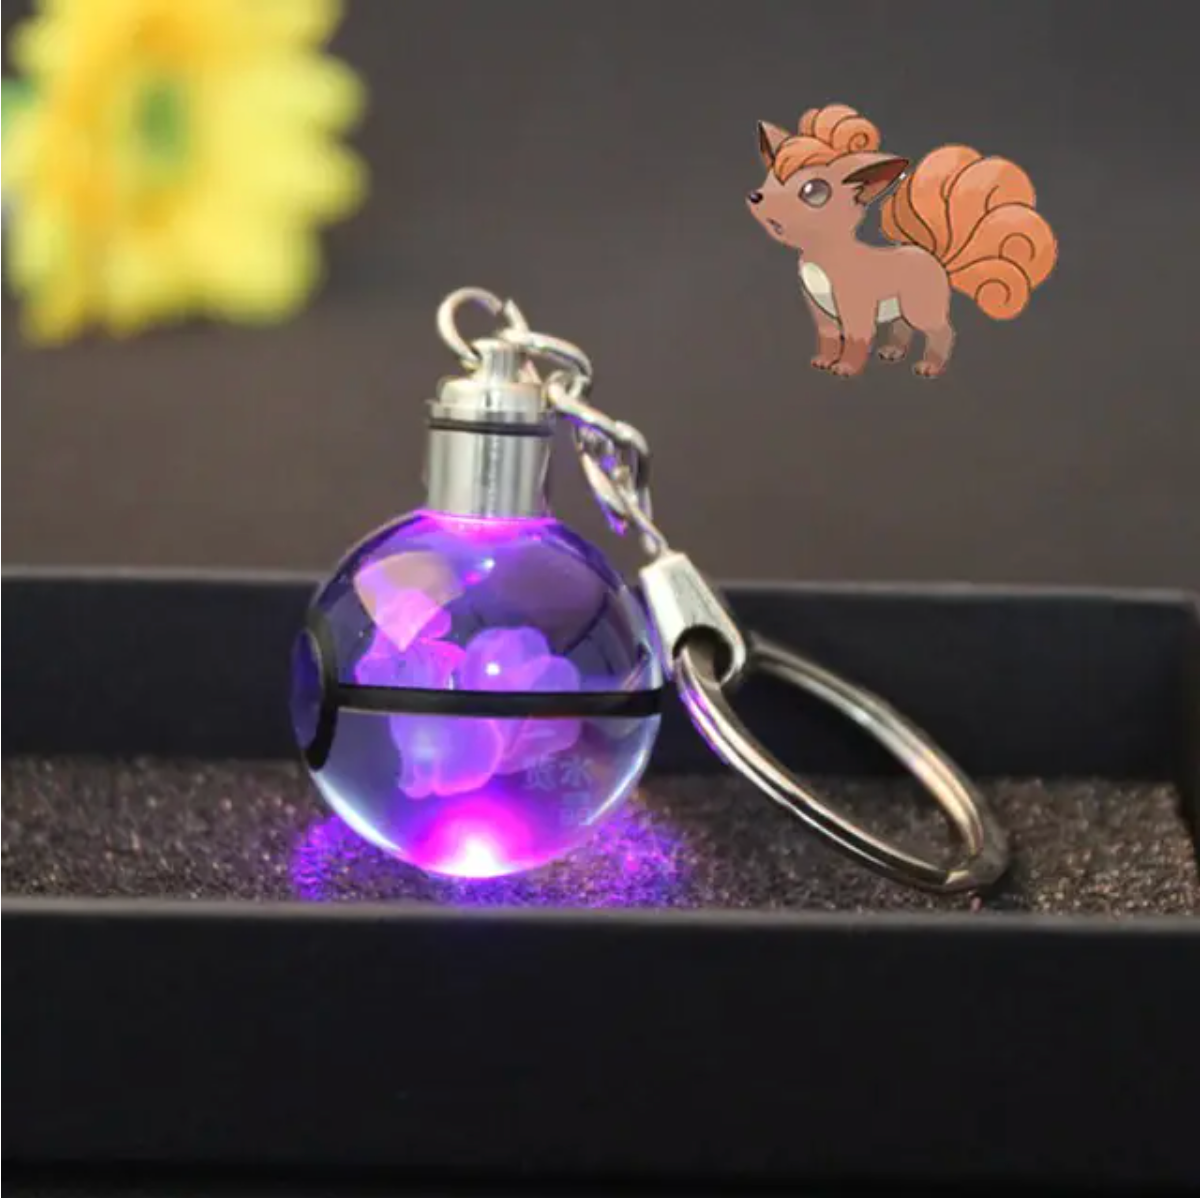 Personalized Crystal Keychain Featuring Characters